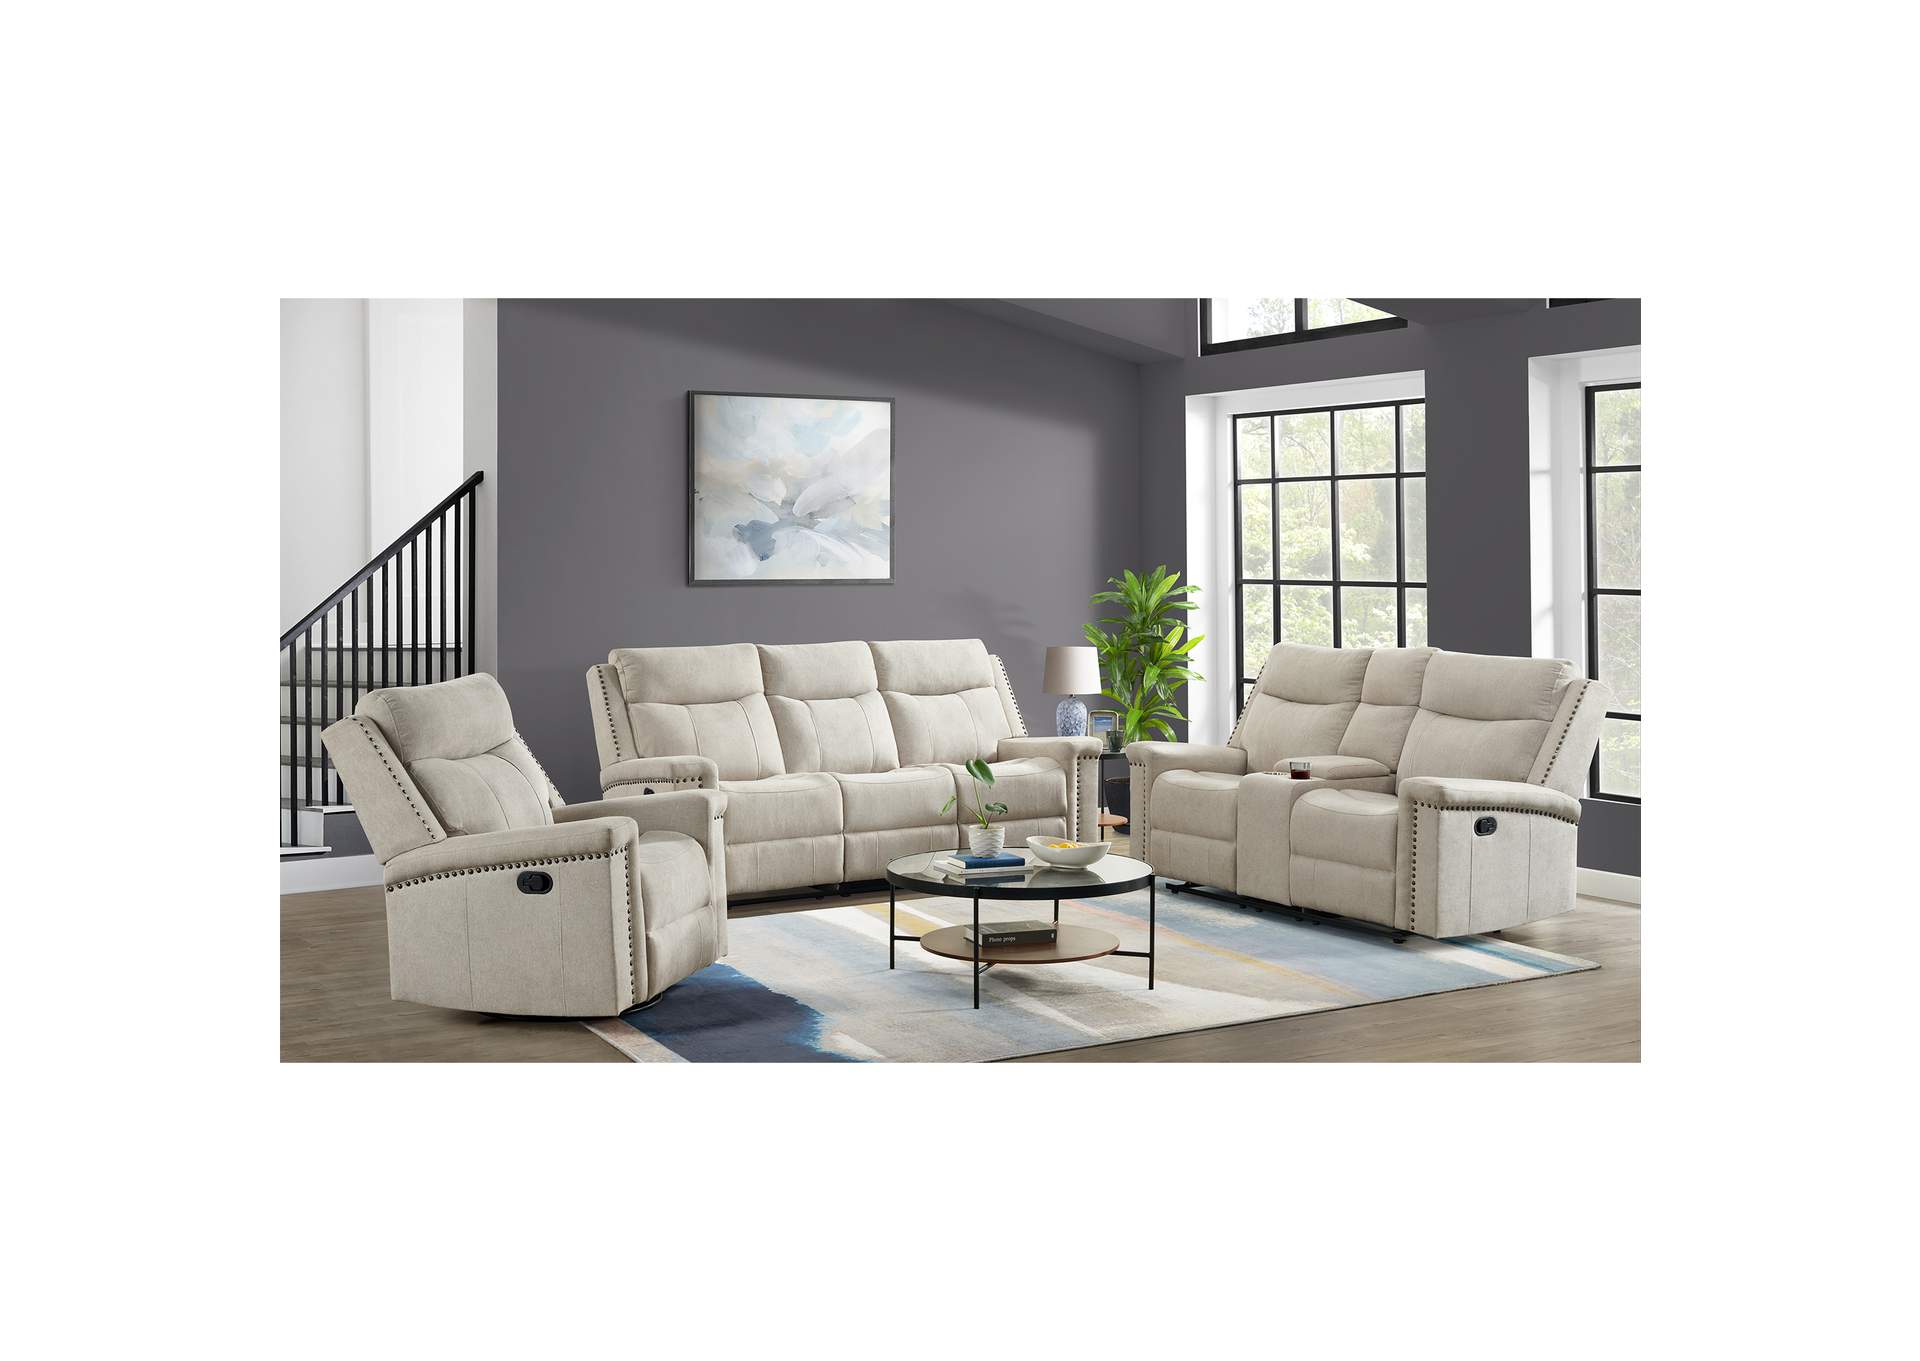 Ingram Motion Sofa With Dropdown In Hammertime 20 Cream,Elements